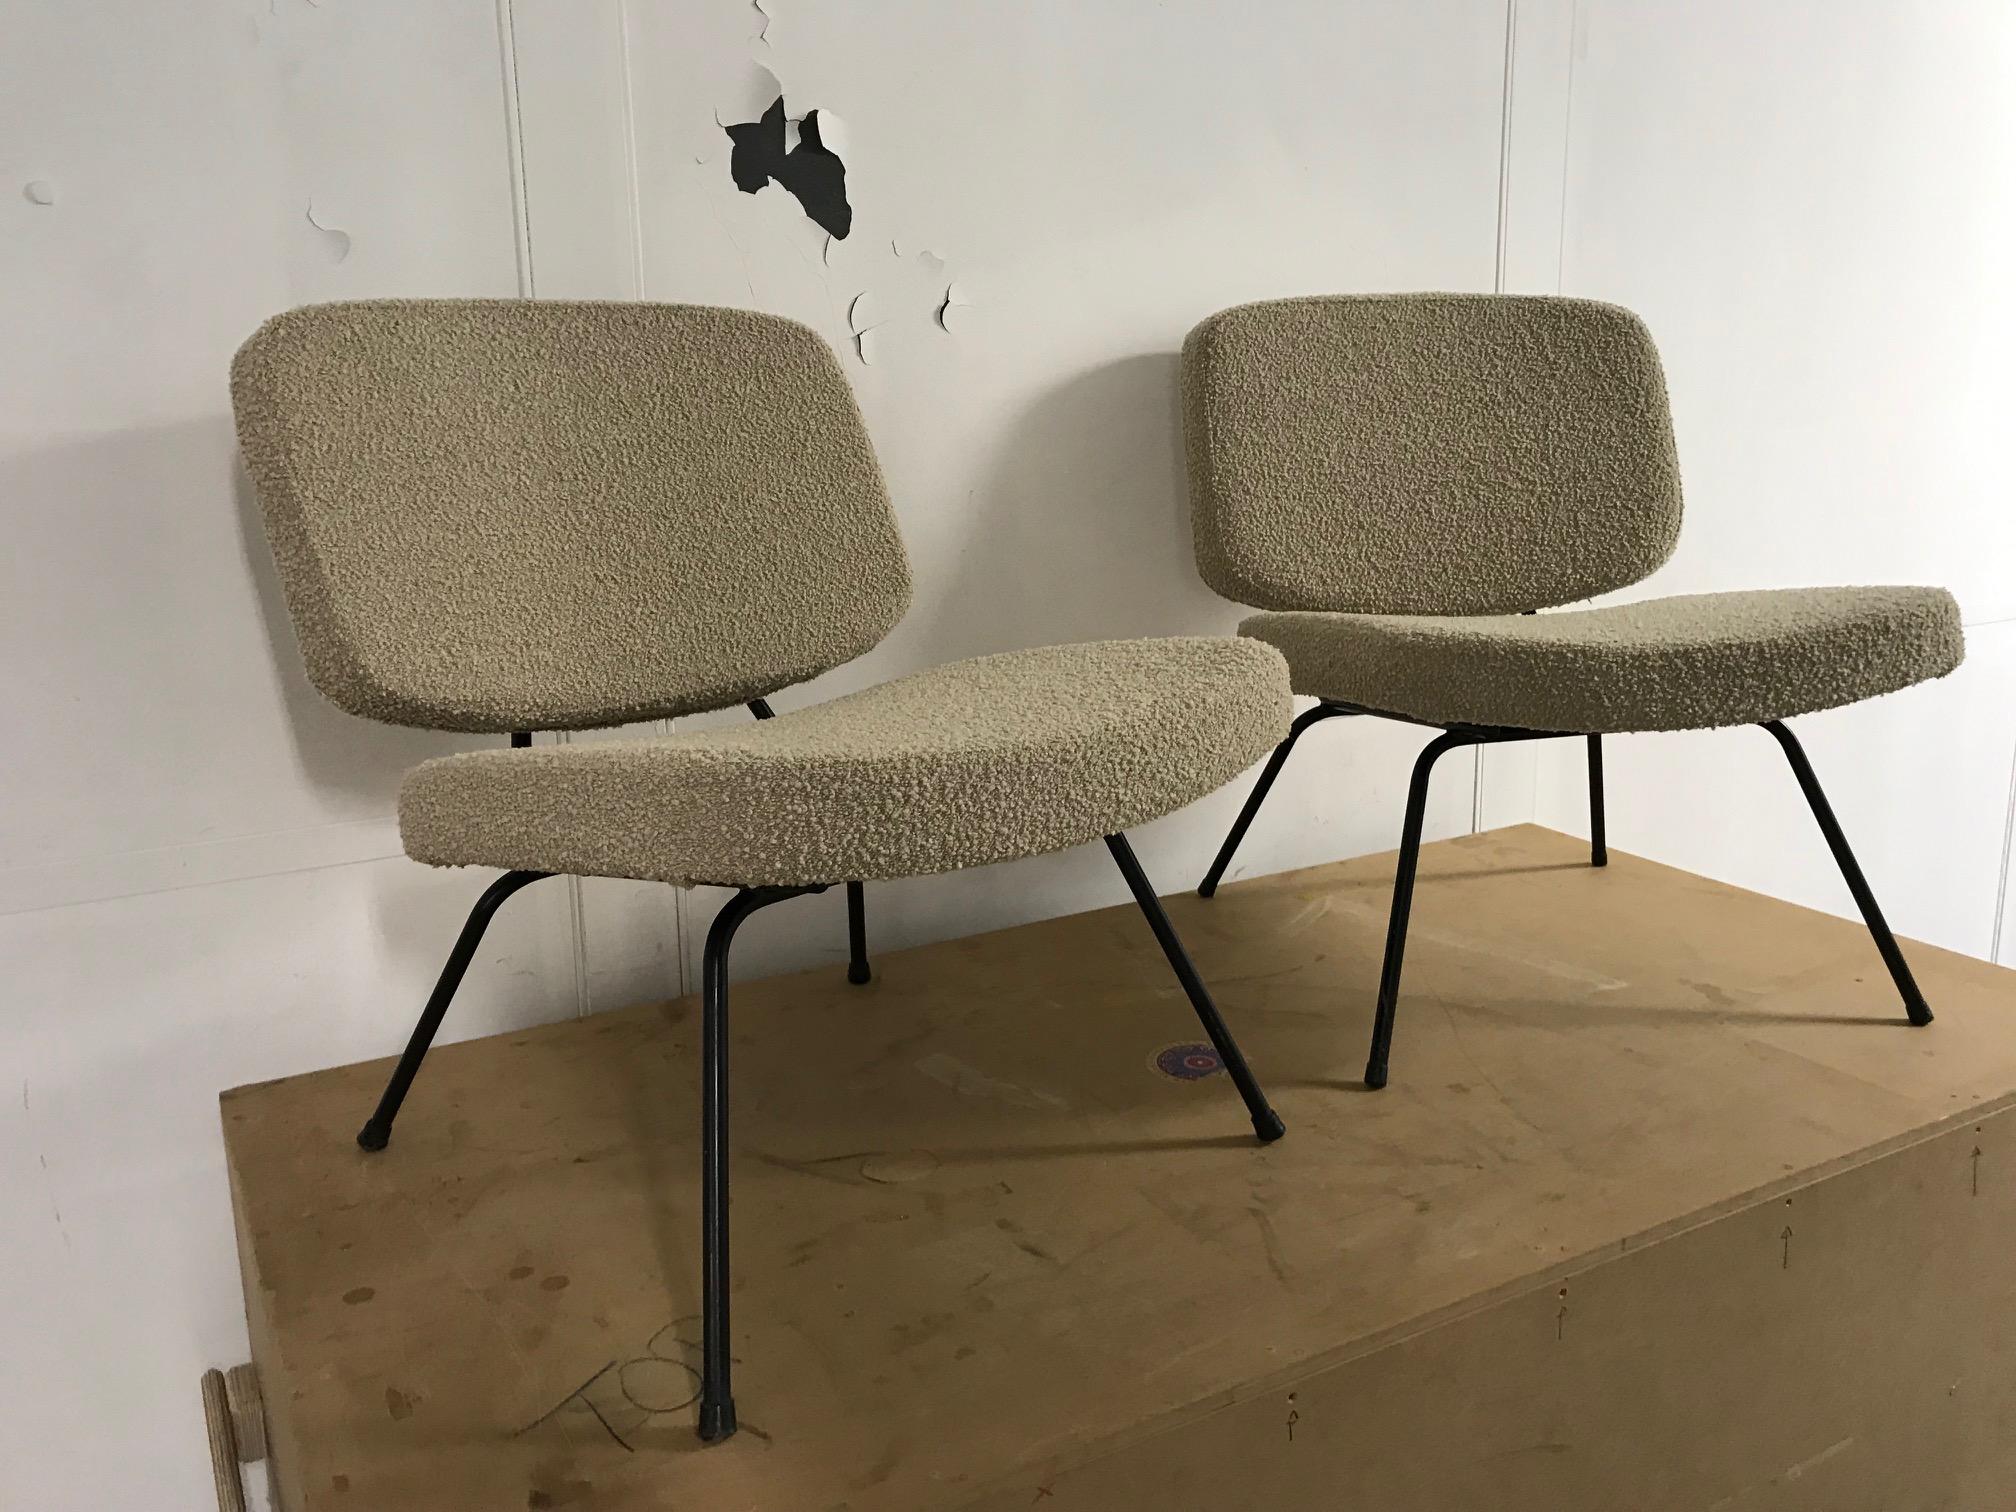 CM190 slipper chairs by Pierre Paulin, France, Thonet editions.
Recently reupholstered with a beige fabric by Bisson Bruneel.